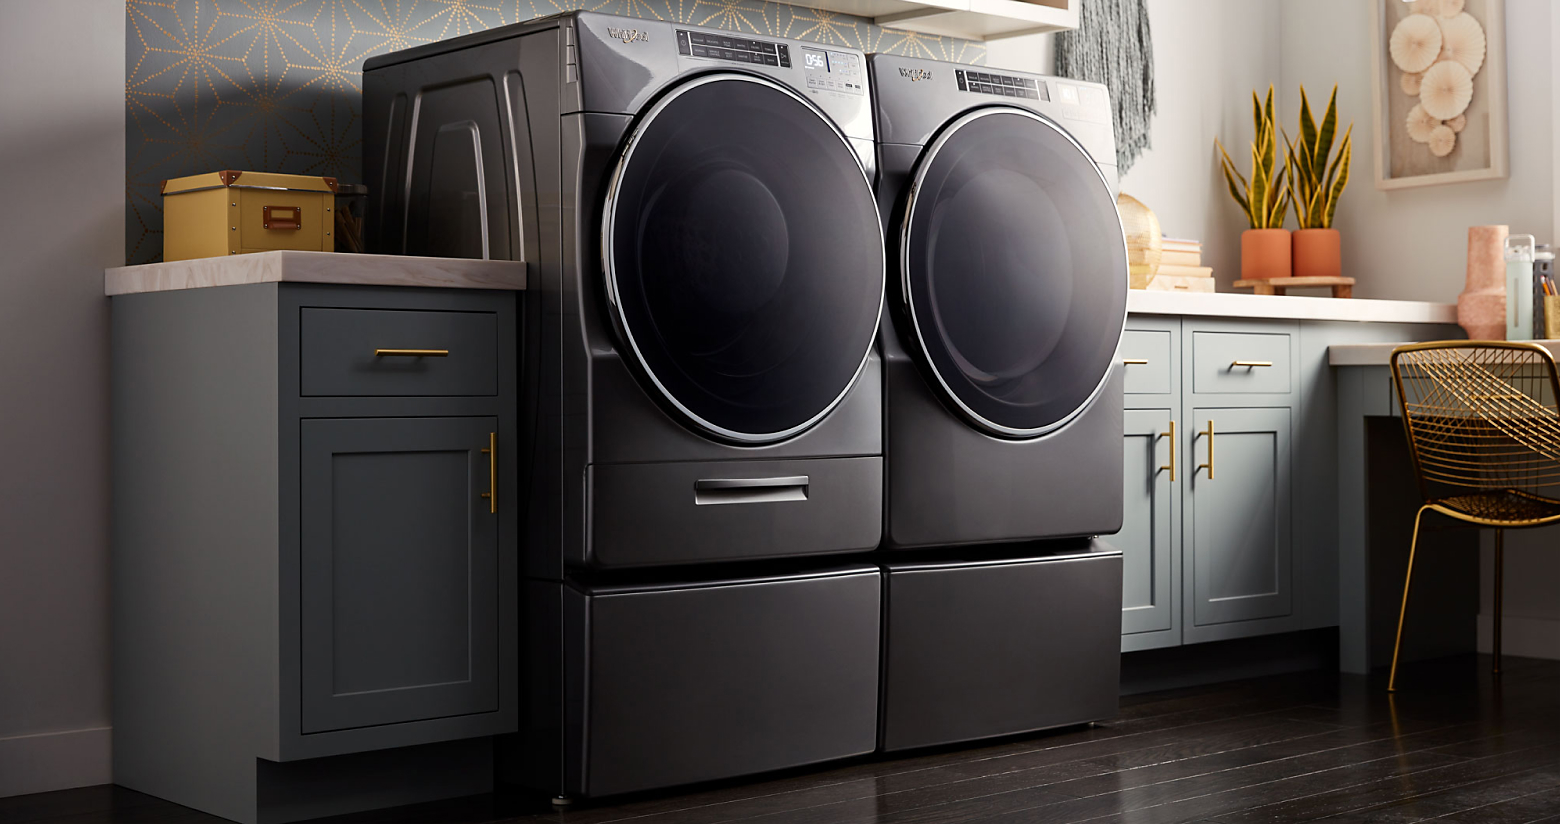 Whirlpool® front loading washer and dryer in a modern laundry room